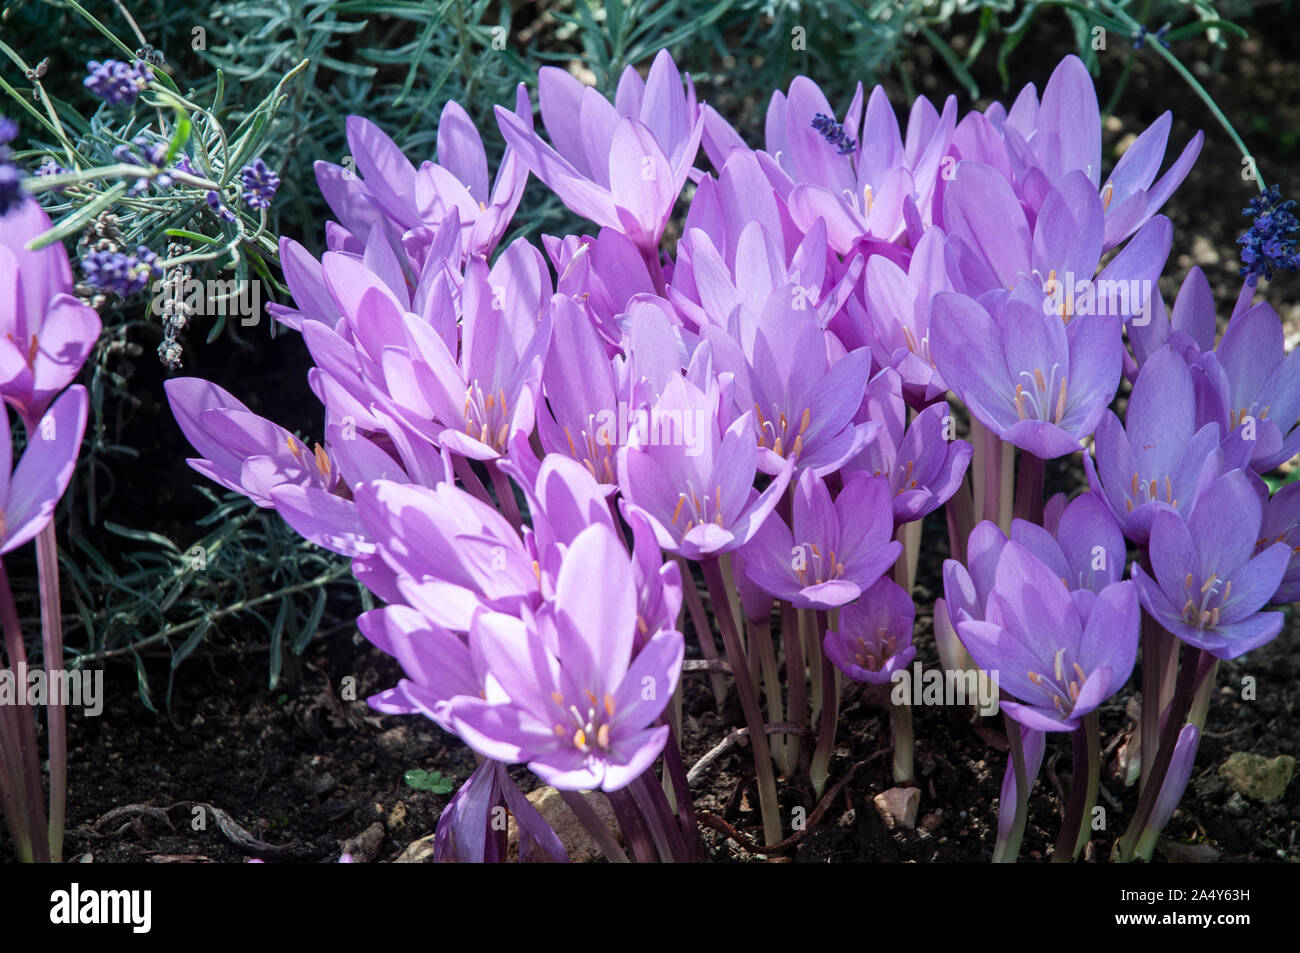 colchicum autumnale, group of flowering poisonous plants, herbal ...